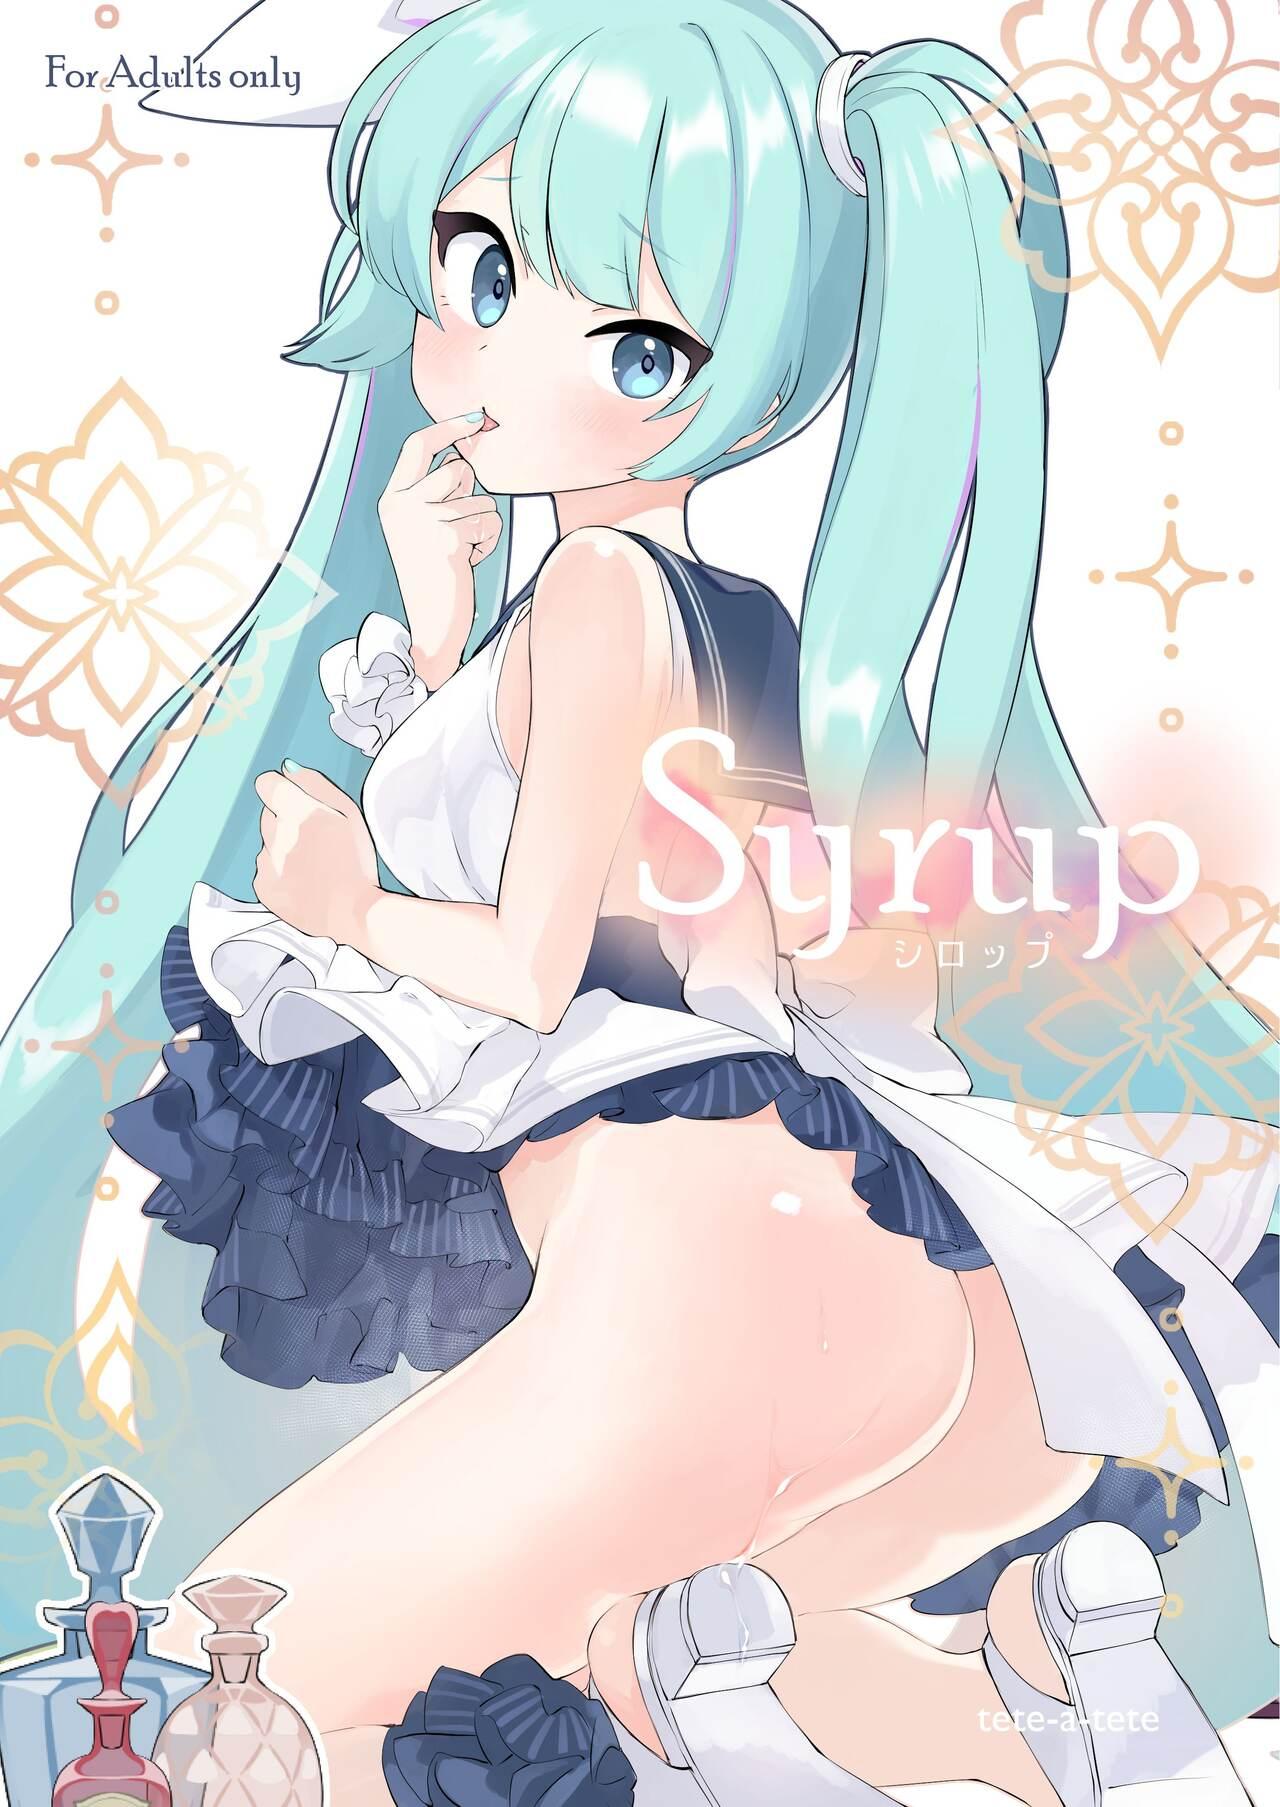 Syrup 1